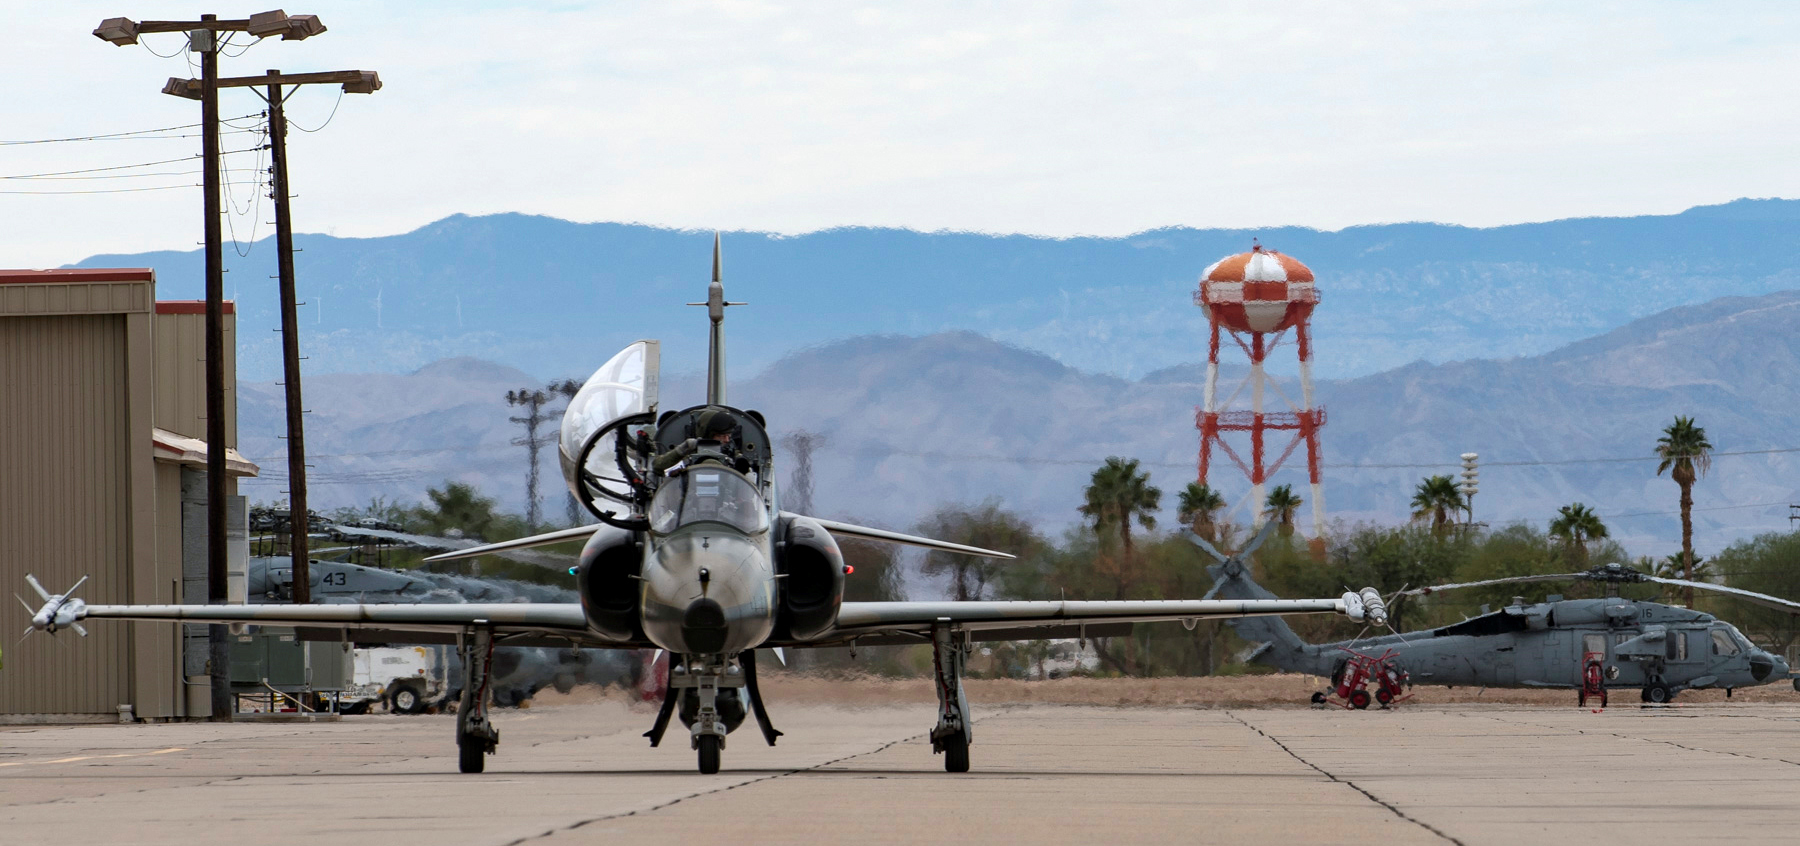 A Royal Canadian Air Force CT-155 Hawk aircraft taxis towards the runway for a flight at the Naval Air Facility in El Centro, California, on November 29, 2017, during Exercise Antler South. PHOTO: Ordinary Seaman Erica Seymour, CK02-2017-1043-012